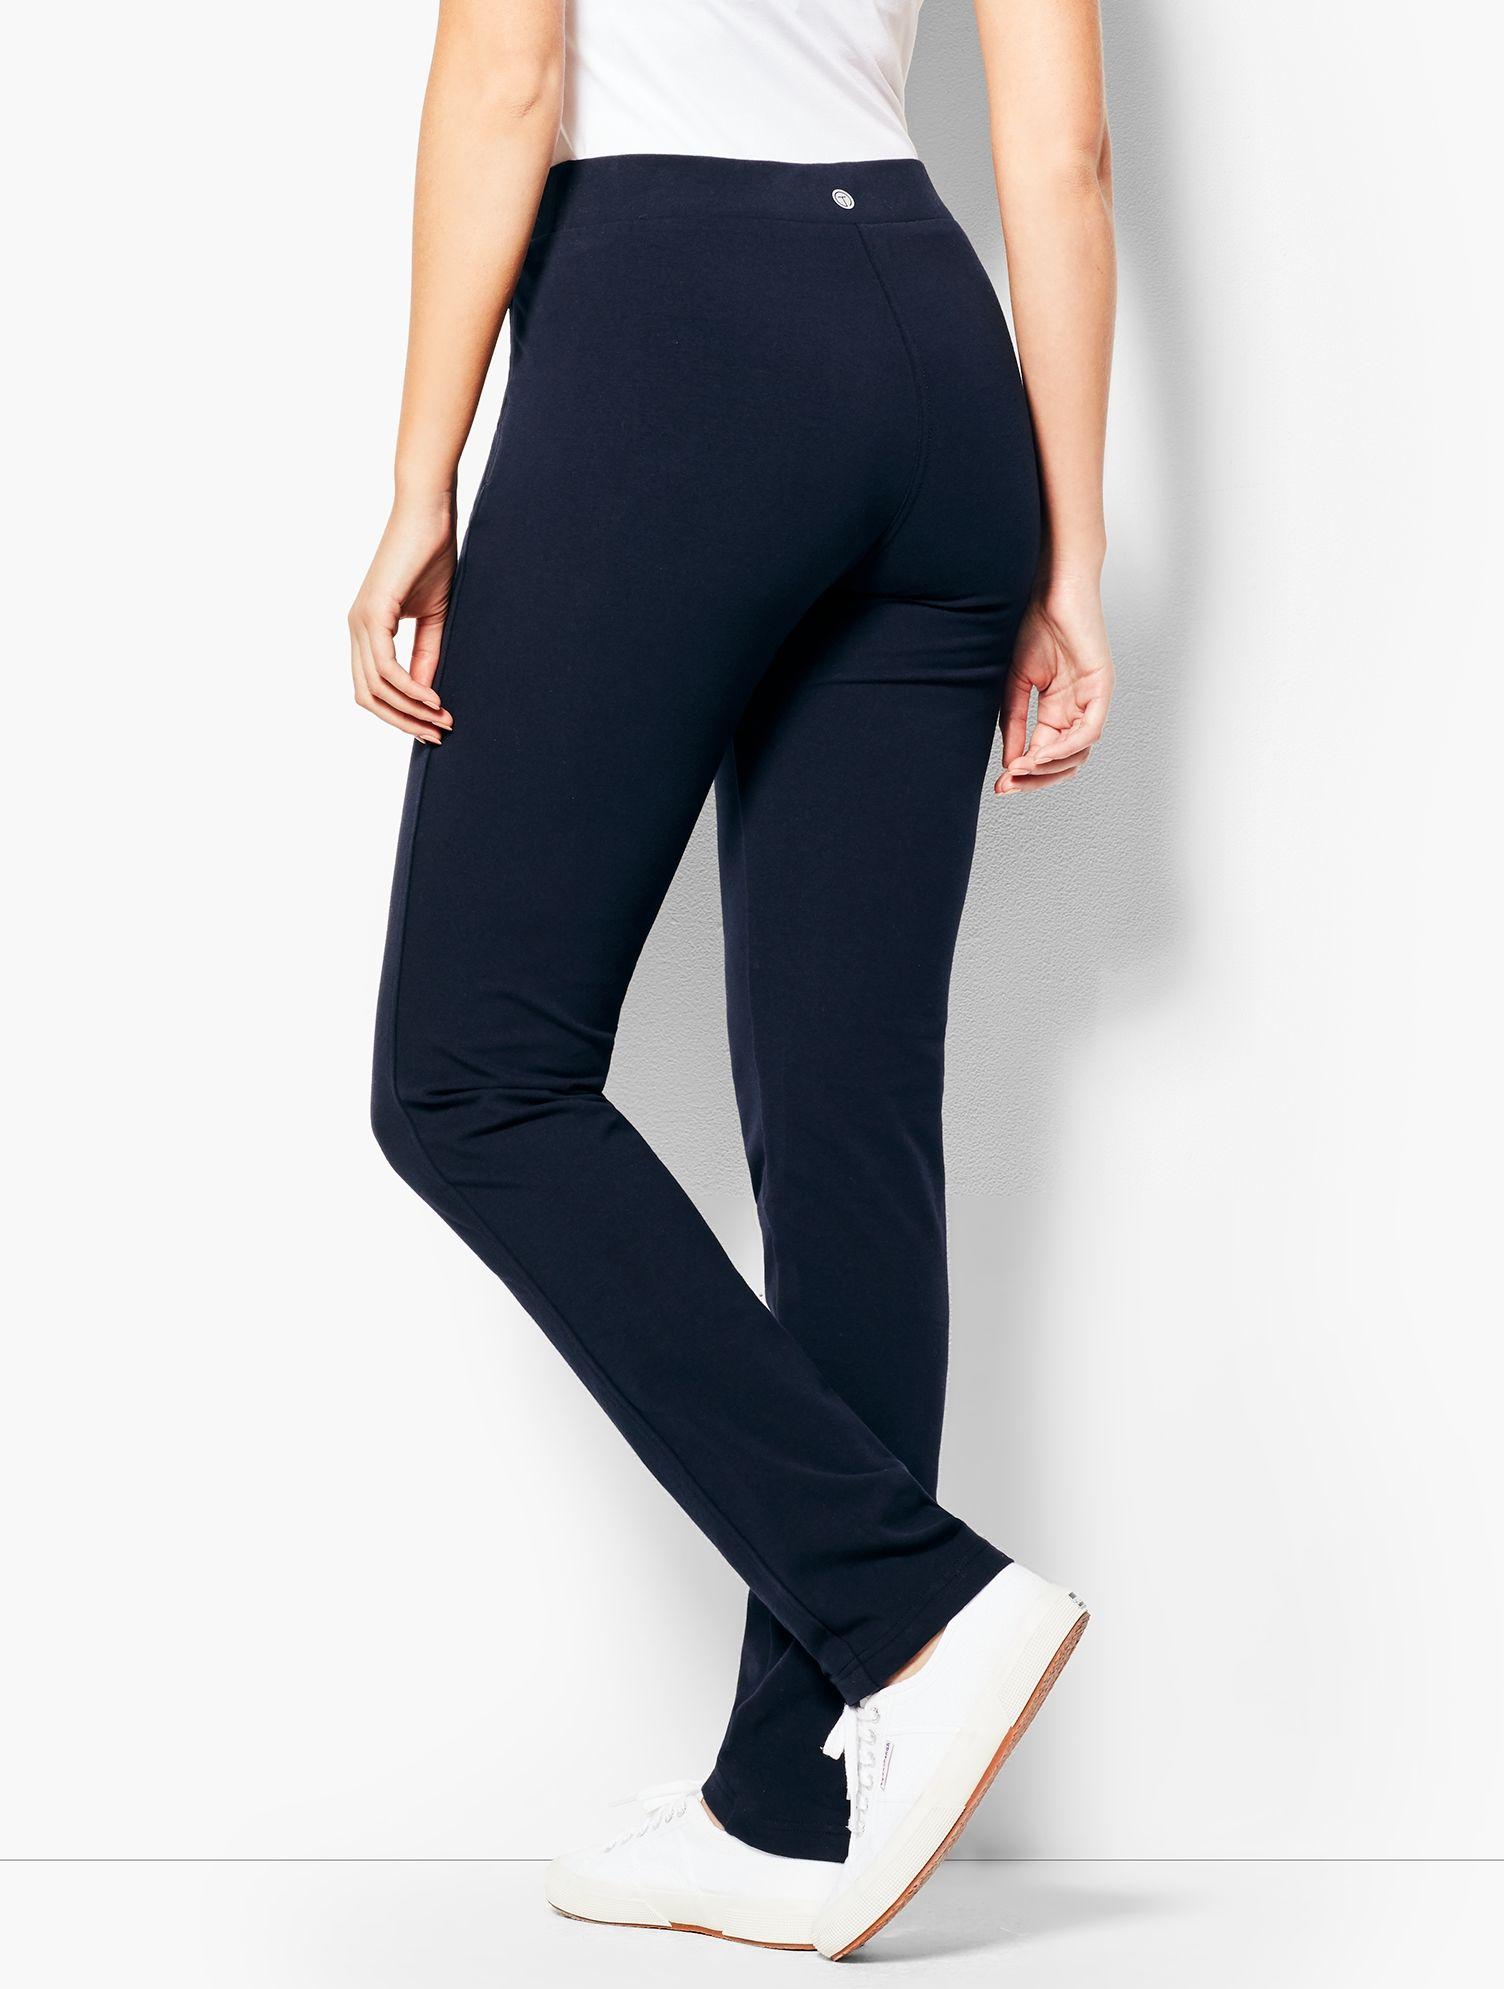 Most Comfortable Yoga Pants For Everyday Use